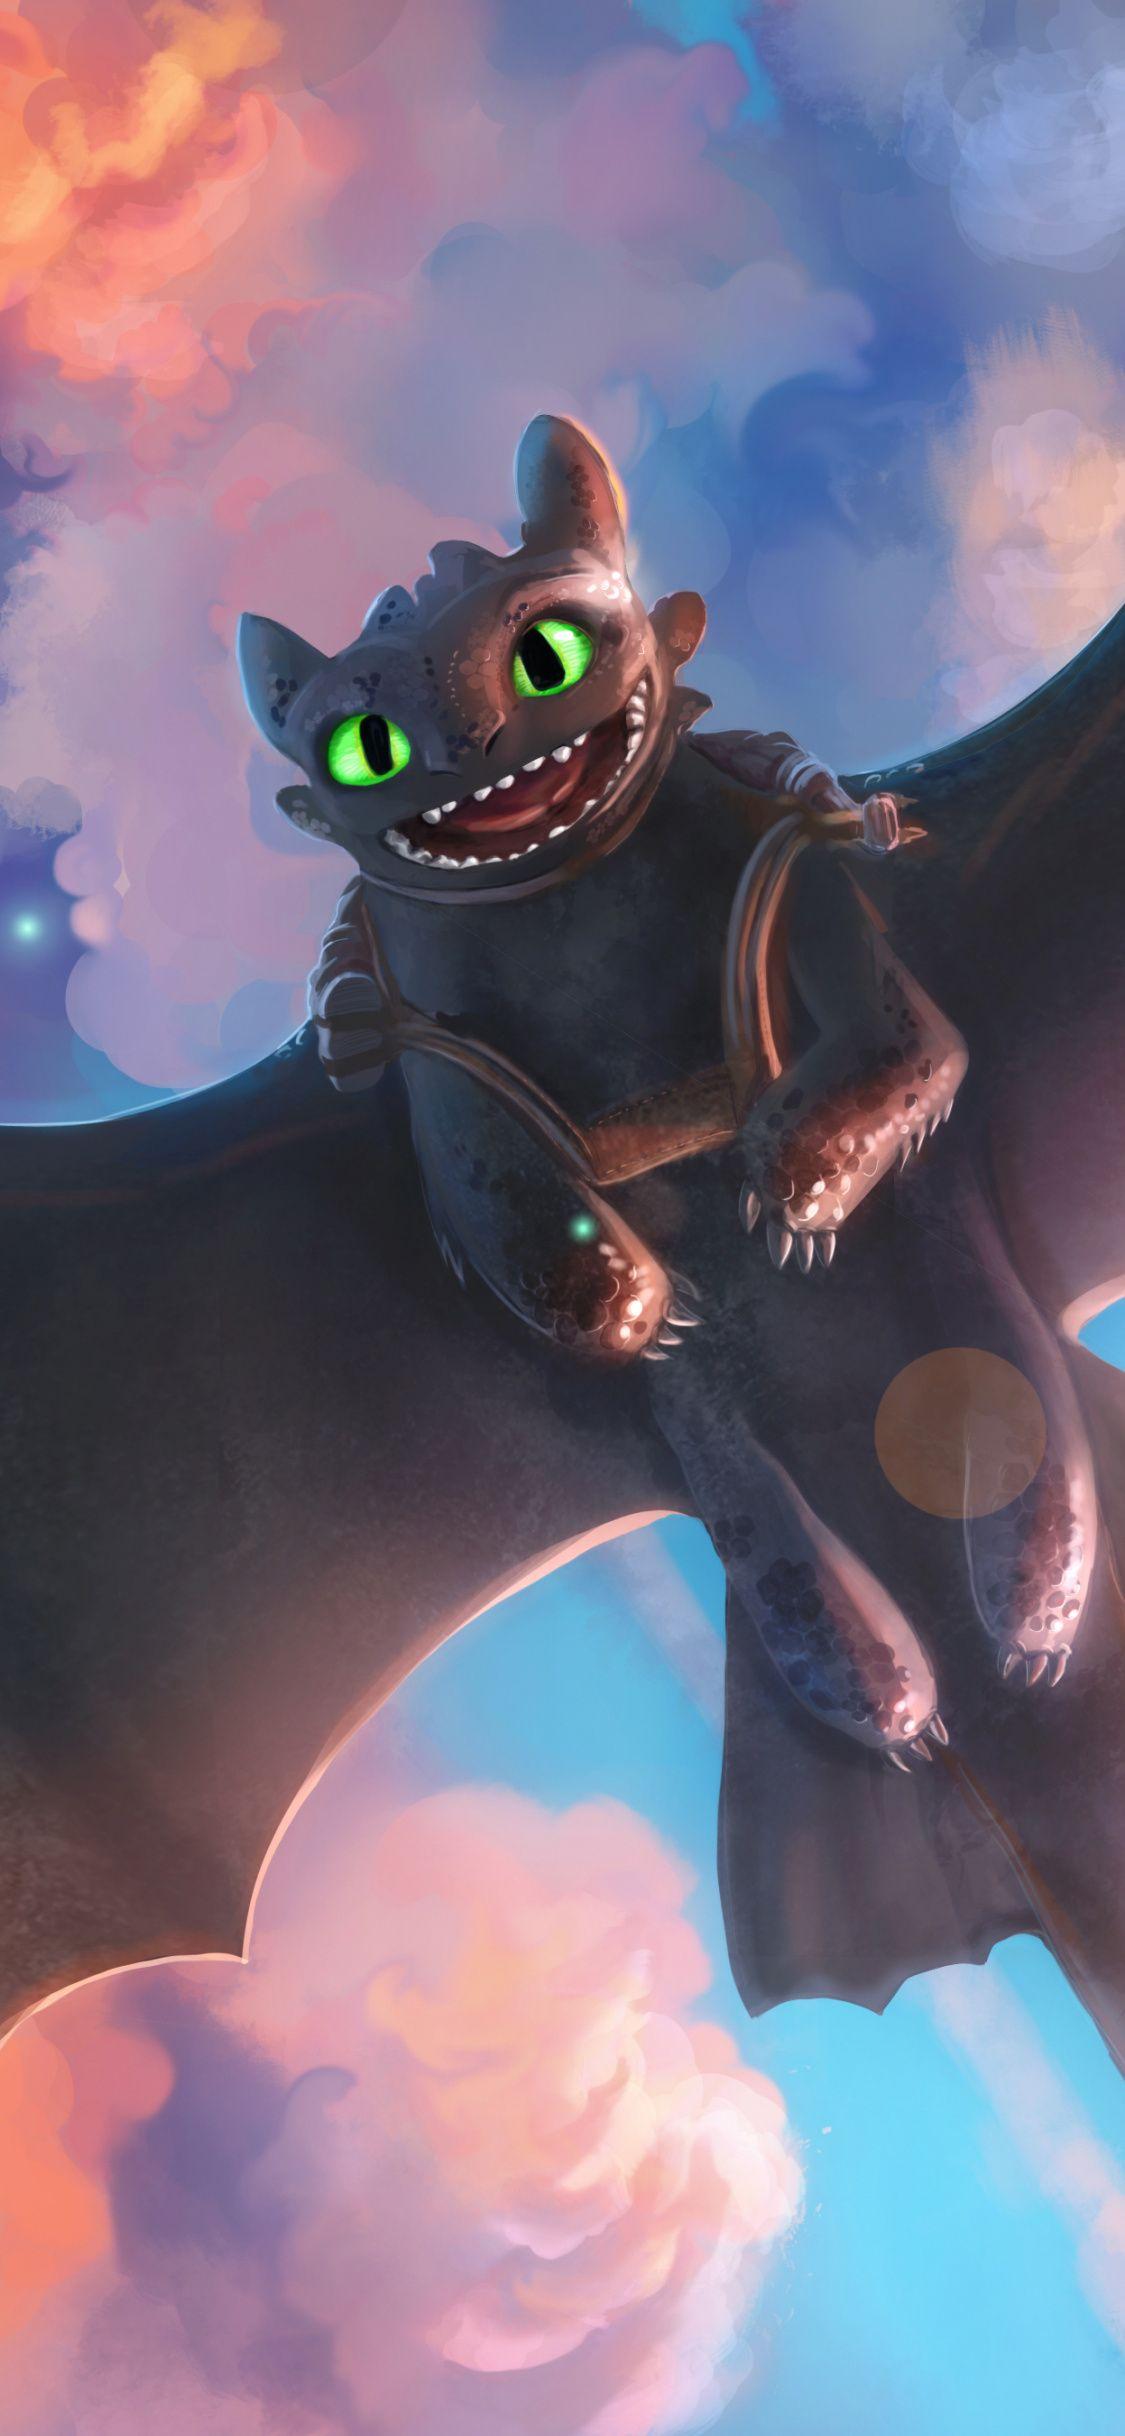 Toothless, night fury, dragon, How to Train Your Dragon